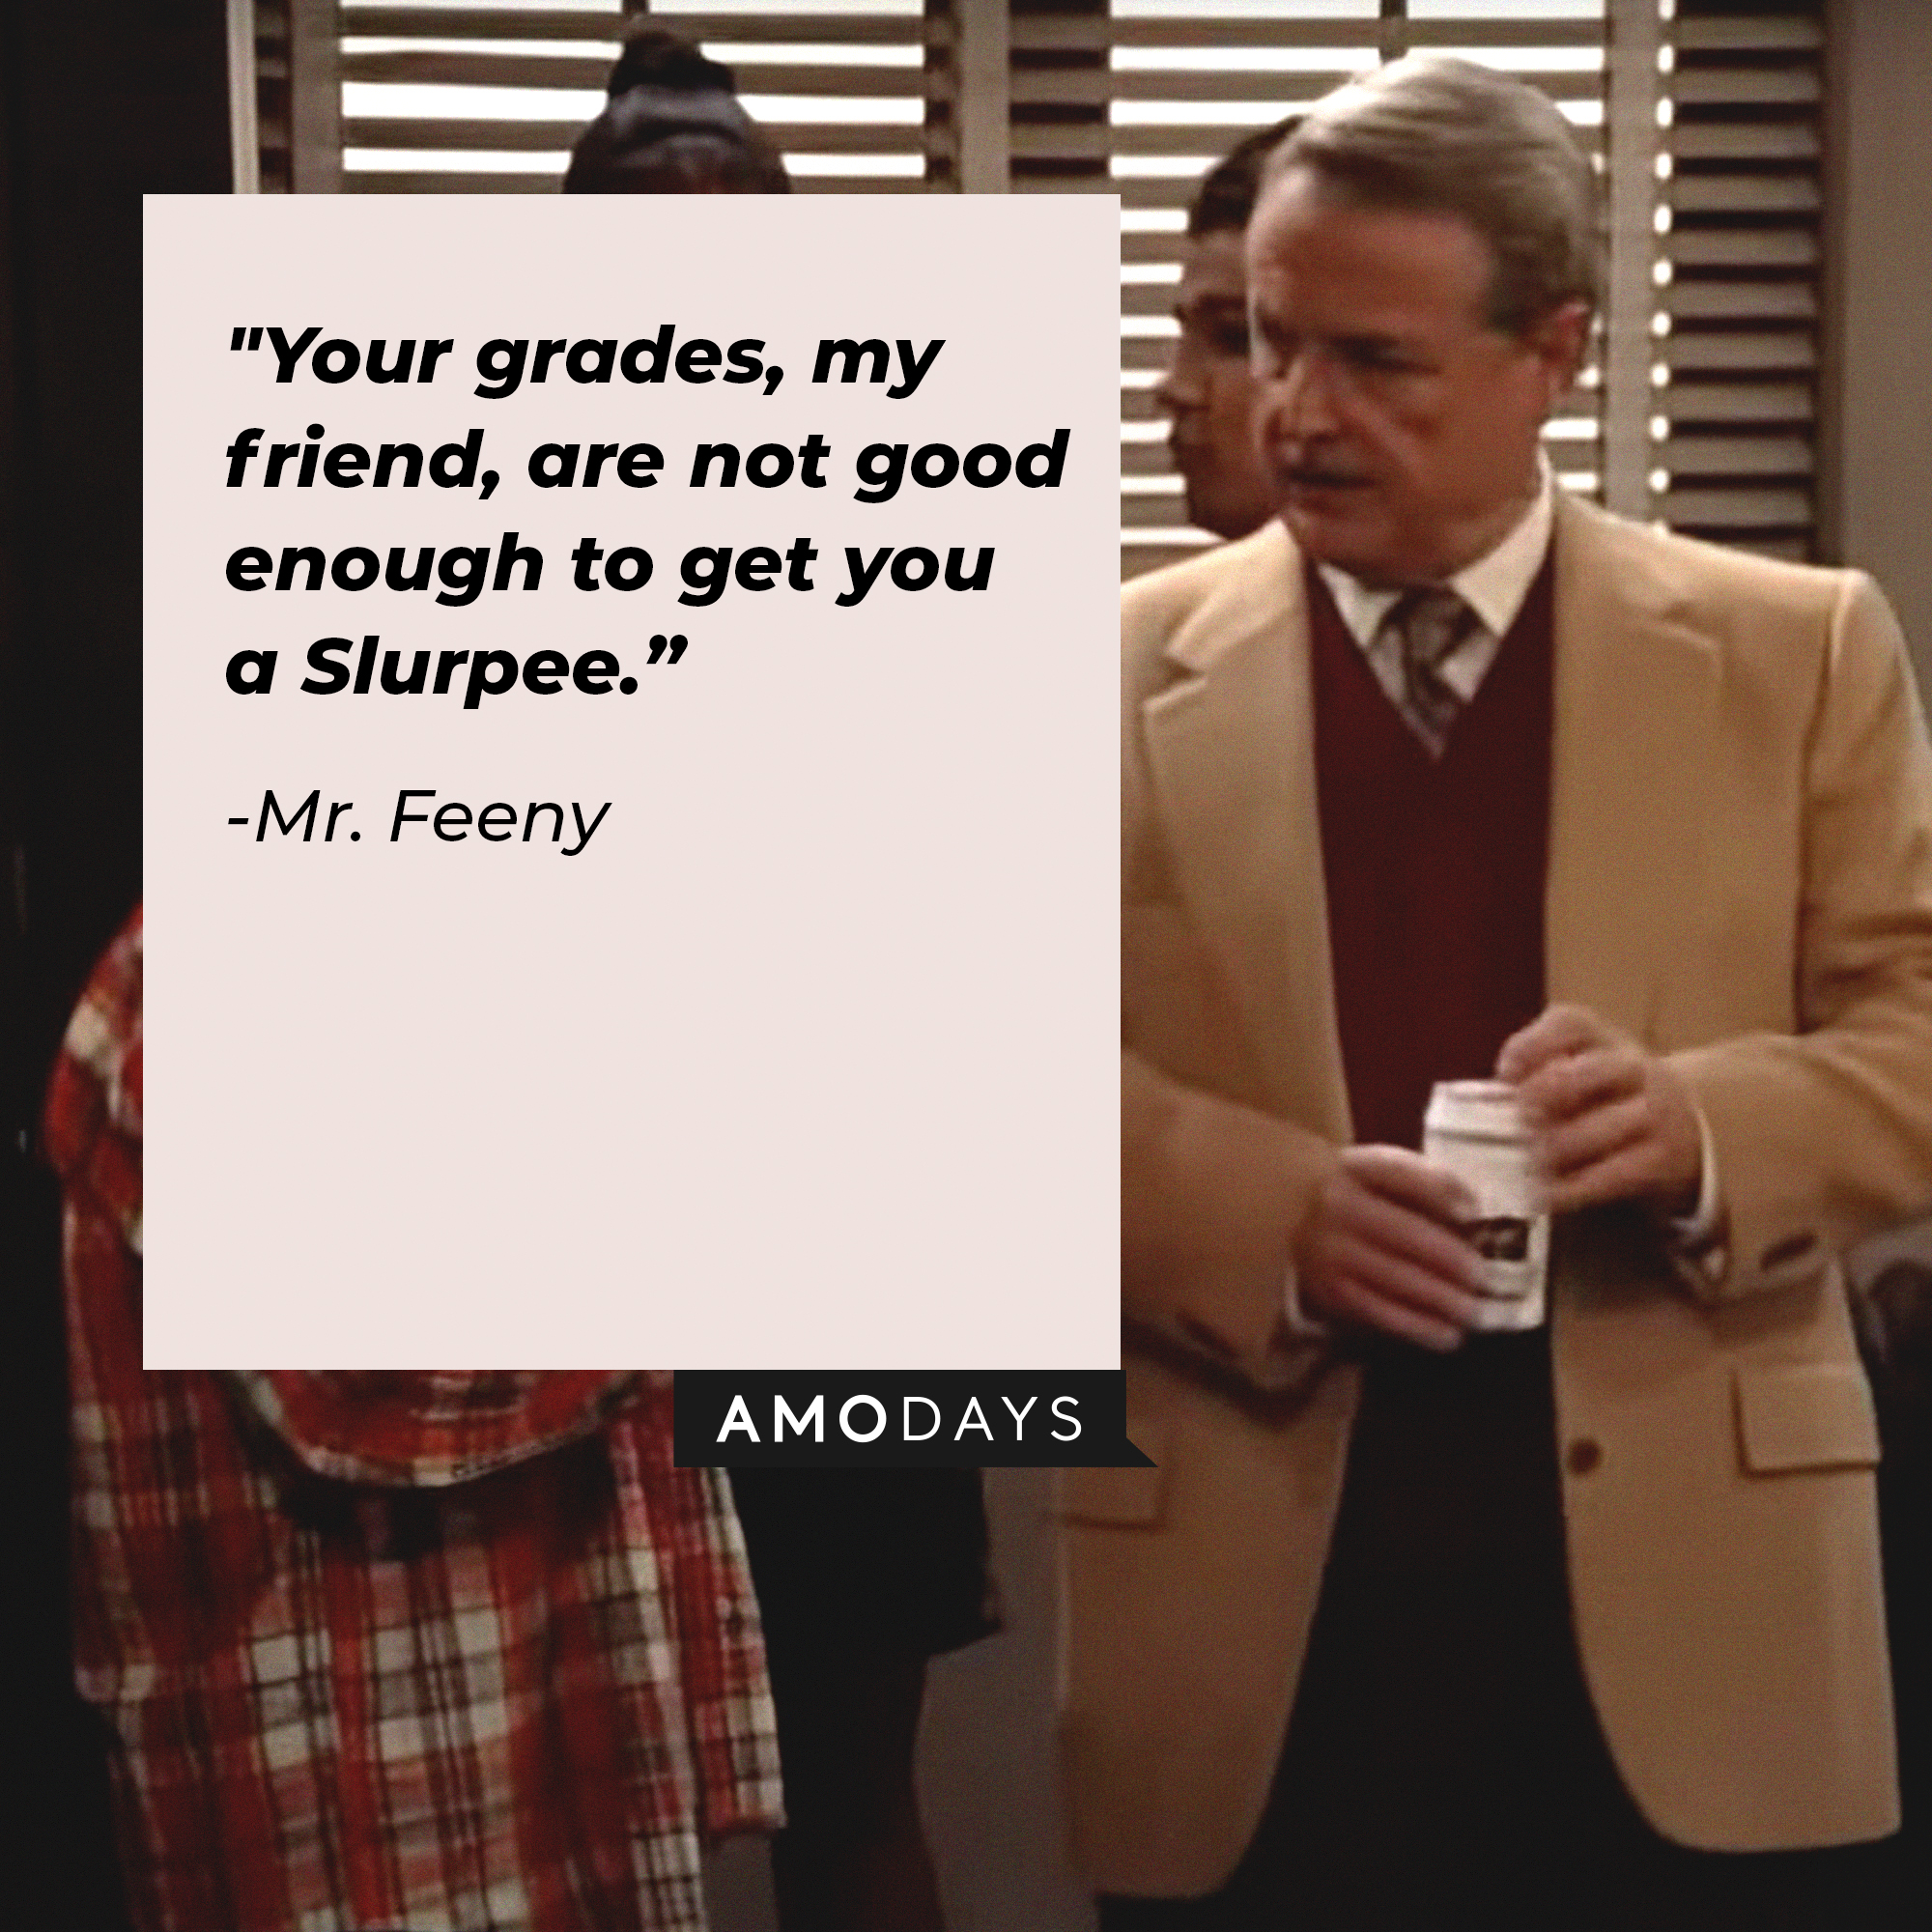 An image of Mr. Feeny with his quote: "Your grades, my friend, are not good enough to get you a Slurpee.” | Source: facebook.com/BoyMeetsWorldSeries